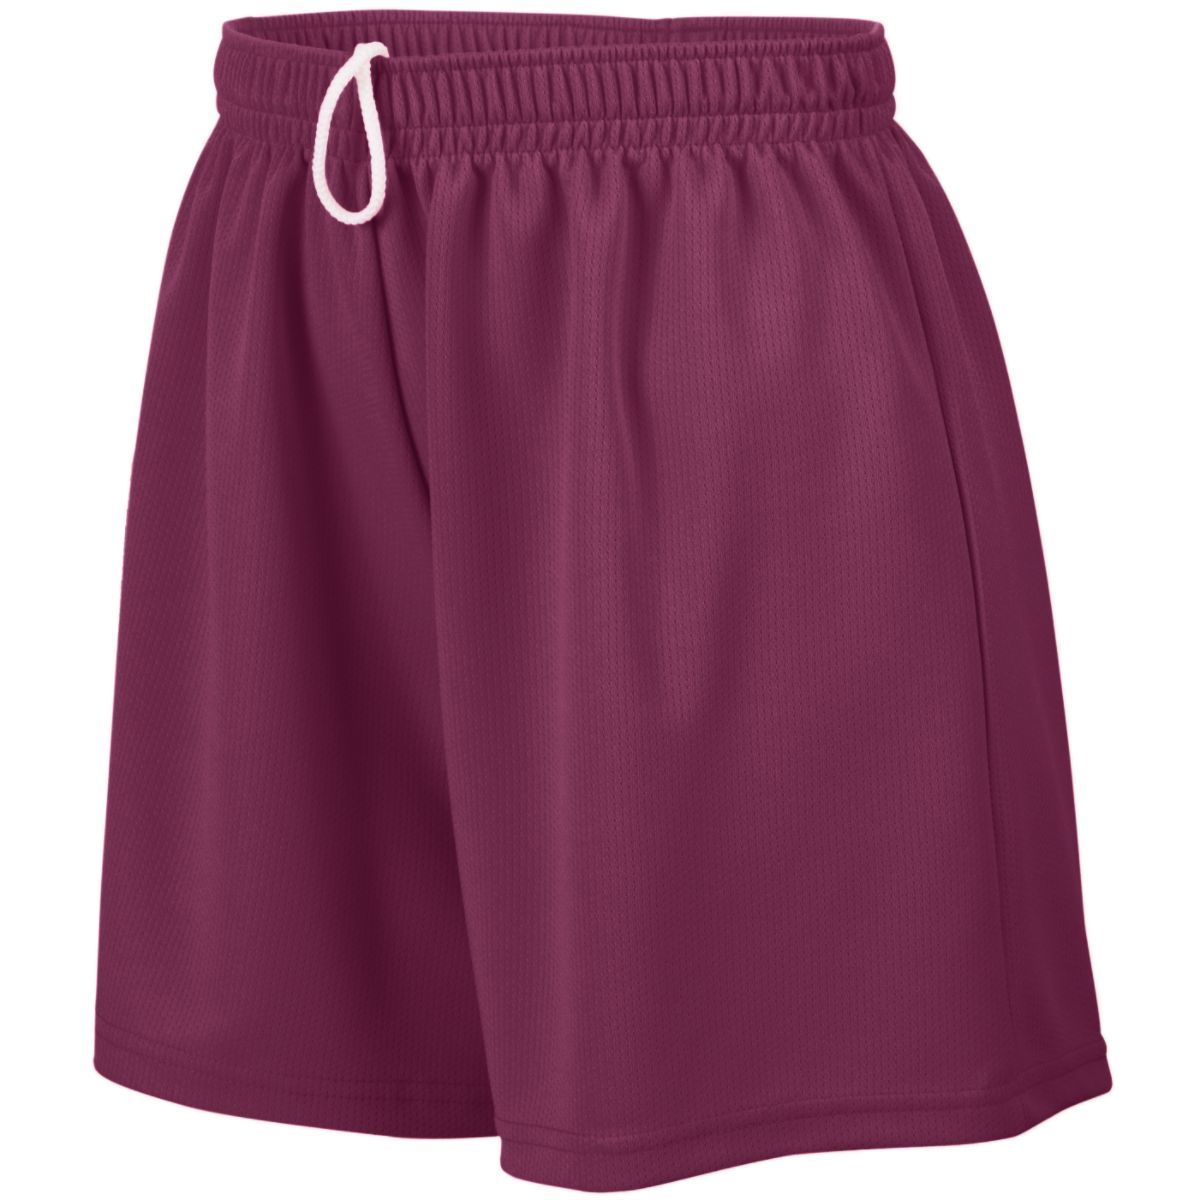 Augusta Sportswear Girls Wicking Mesh Shorts in Maroon  -Part of the Girls, Augusta-Products, Lacrosse, Girls-Shorts, All-Sports, All-Sports-1 product lines at KanaleyCreations.com